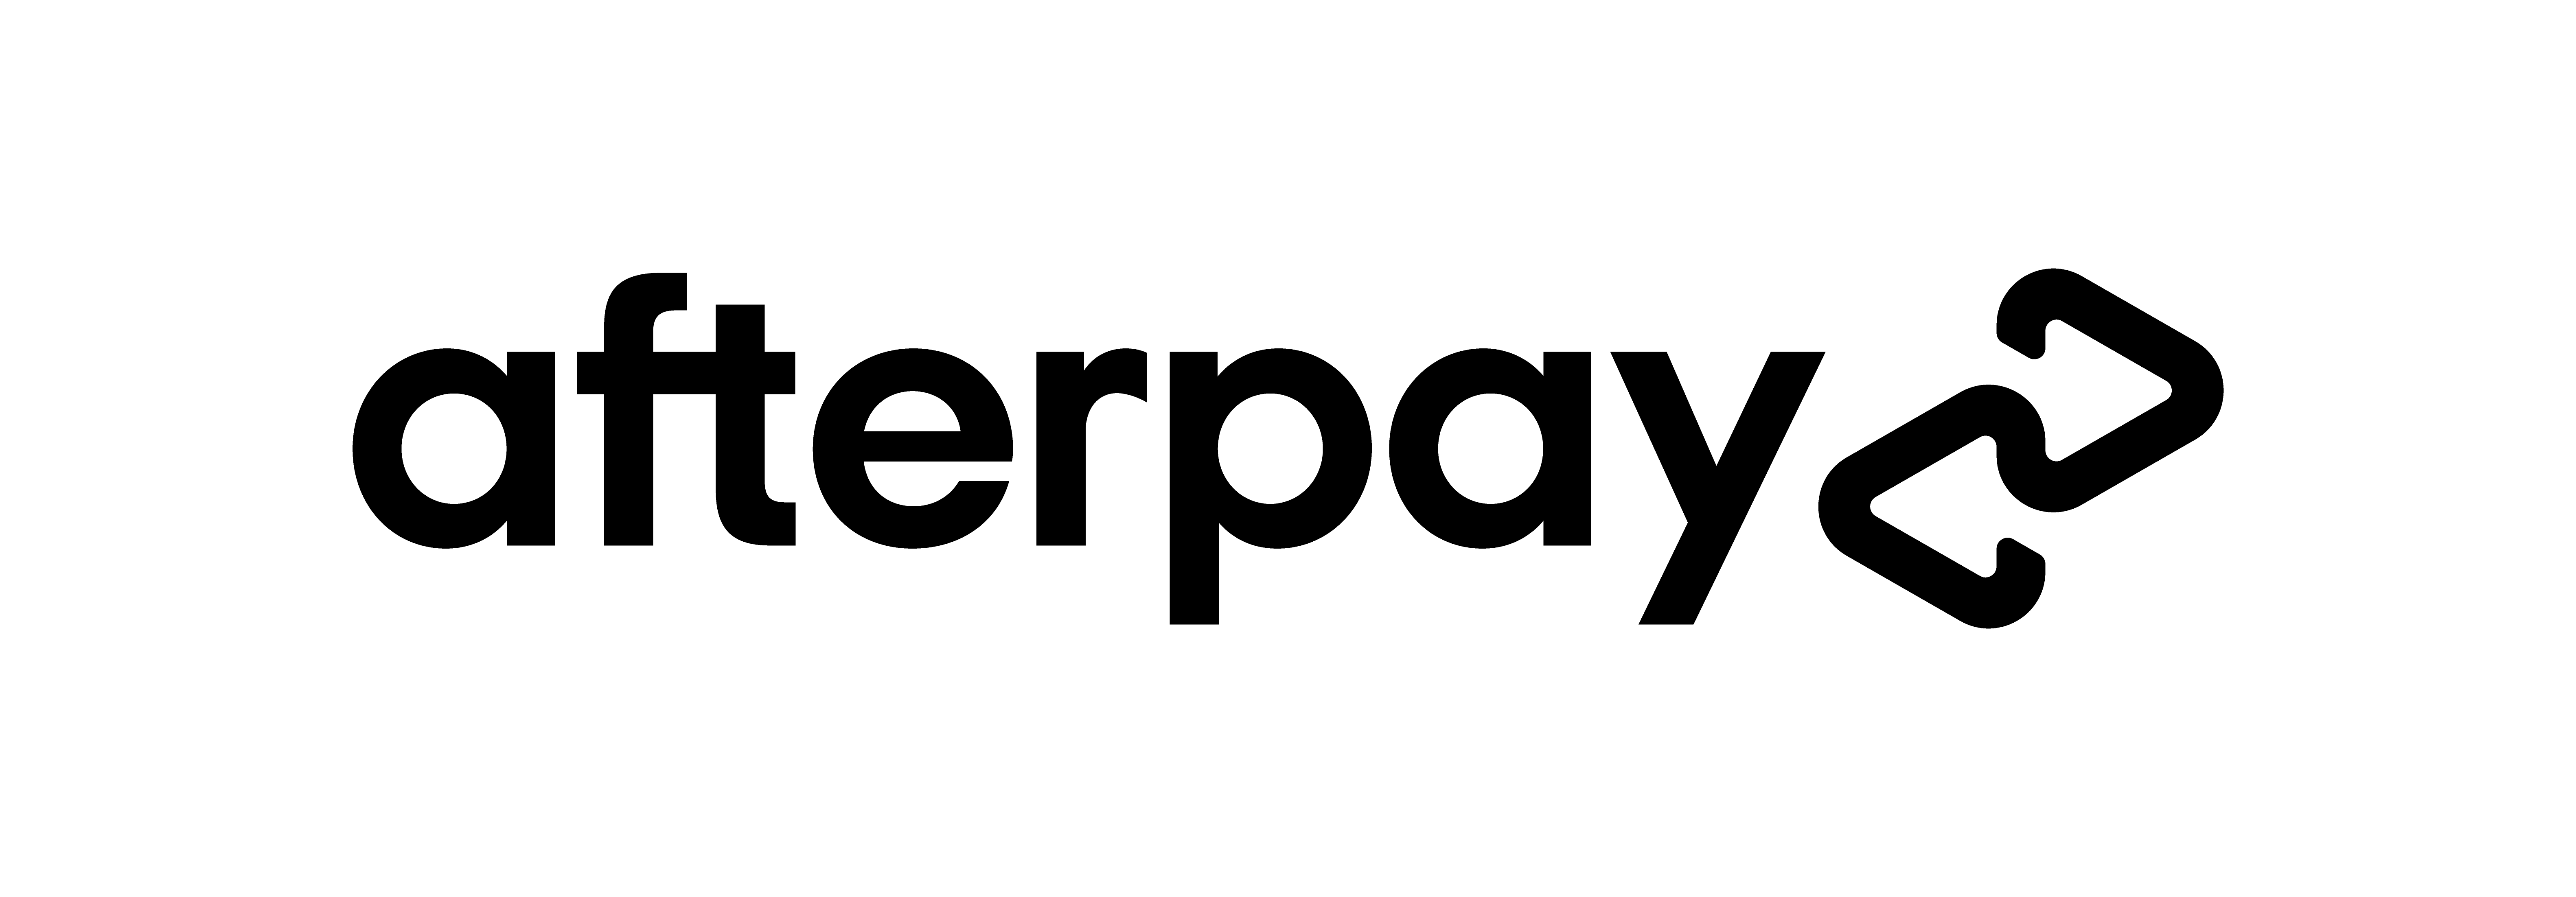 We offer Afterpay